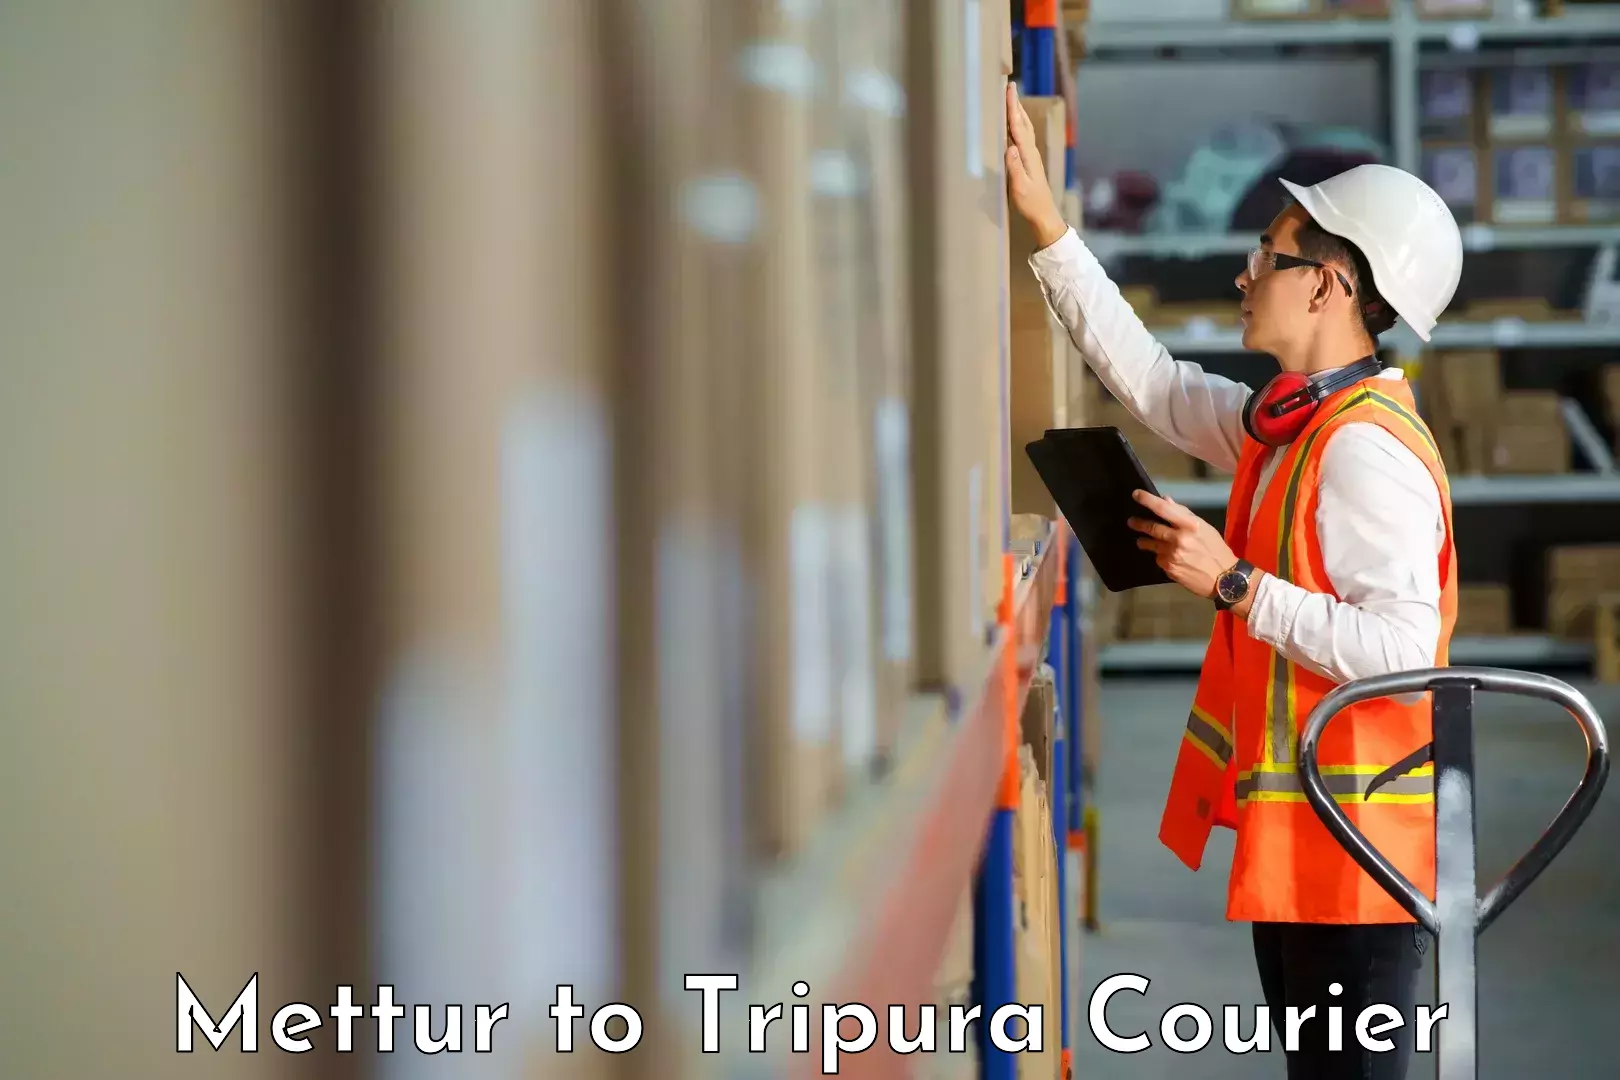 Personal courier services Mettur to Udaipur Tripura